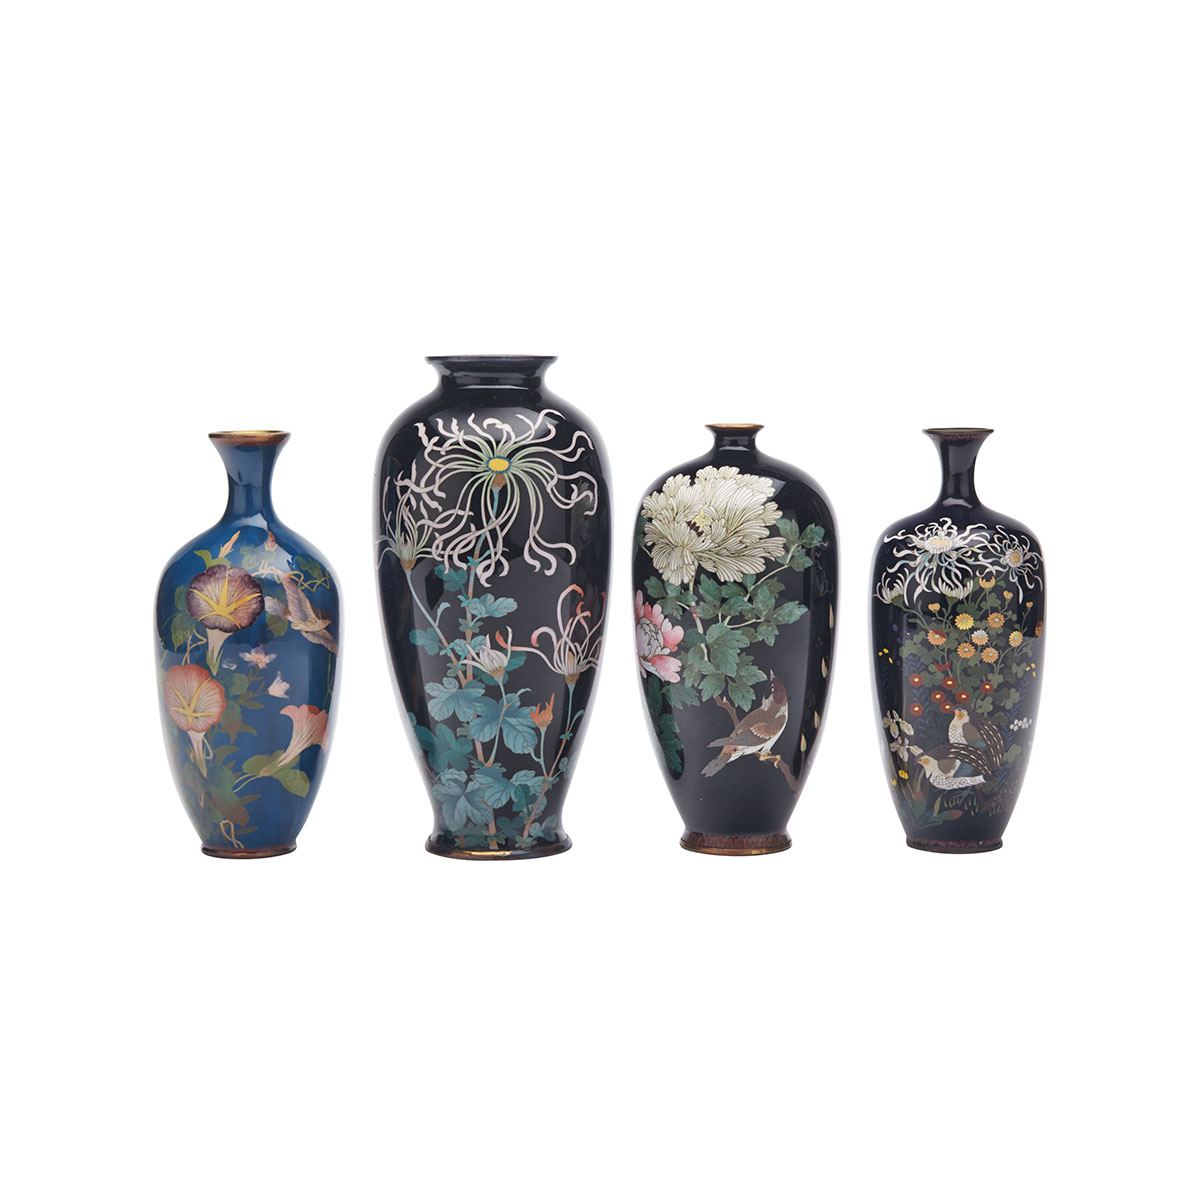 Group of Four Cloisonné Enamel Floral Vases, Early 20th Century